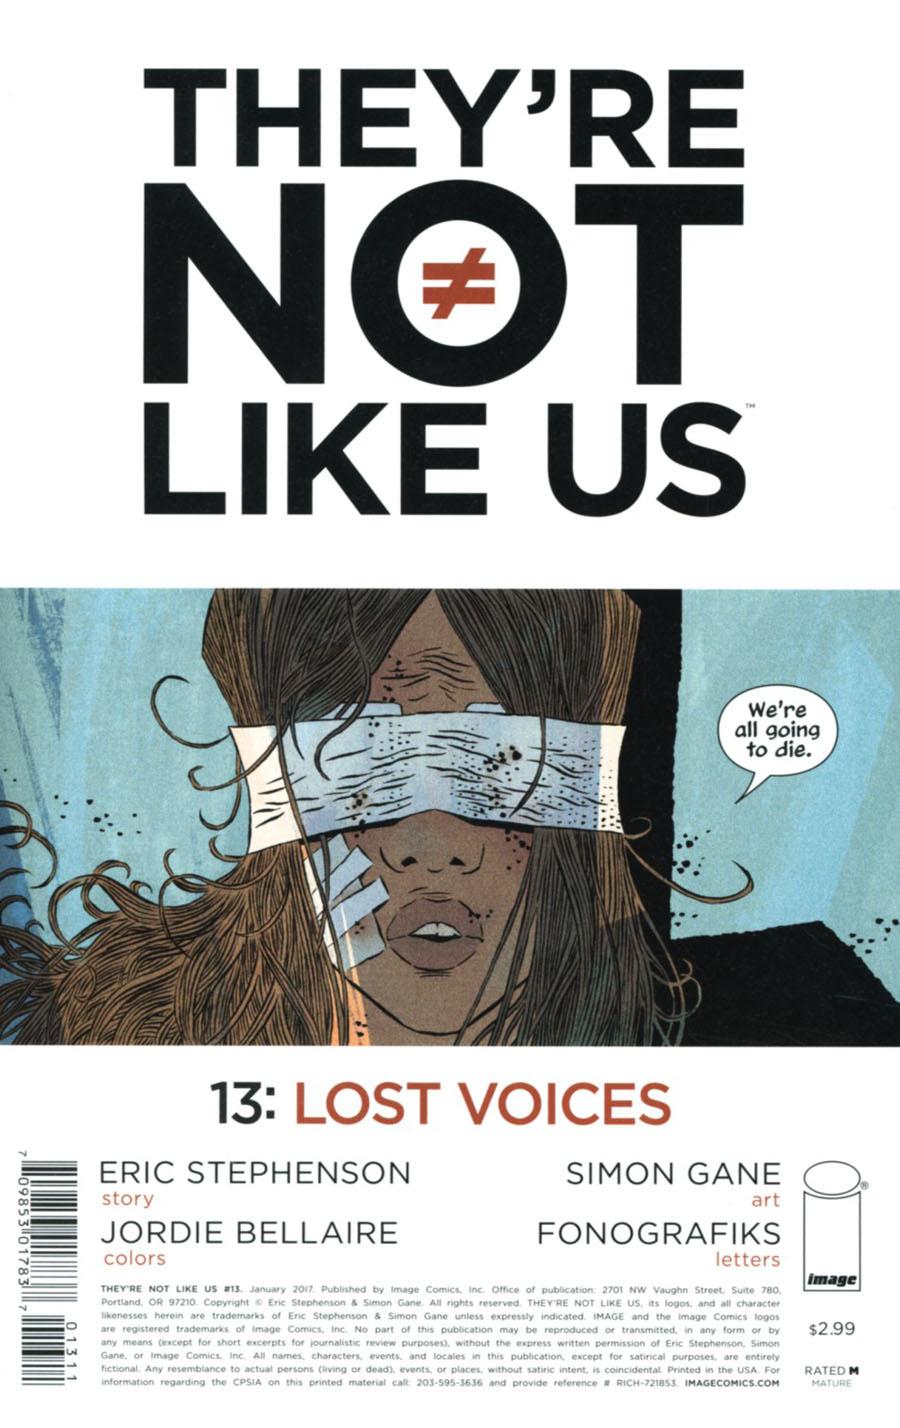 Theyre Not Like Us Vol. 1 #13